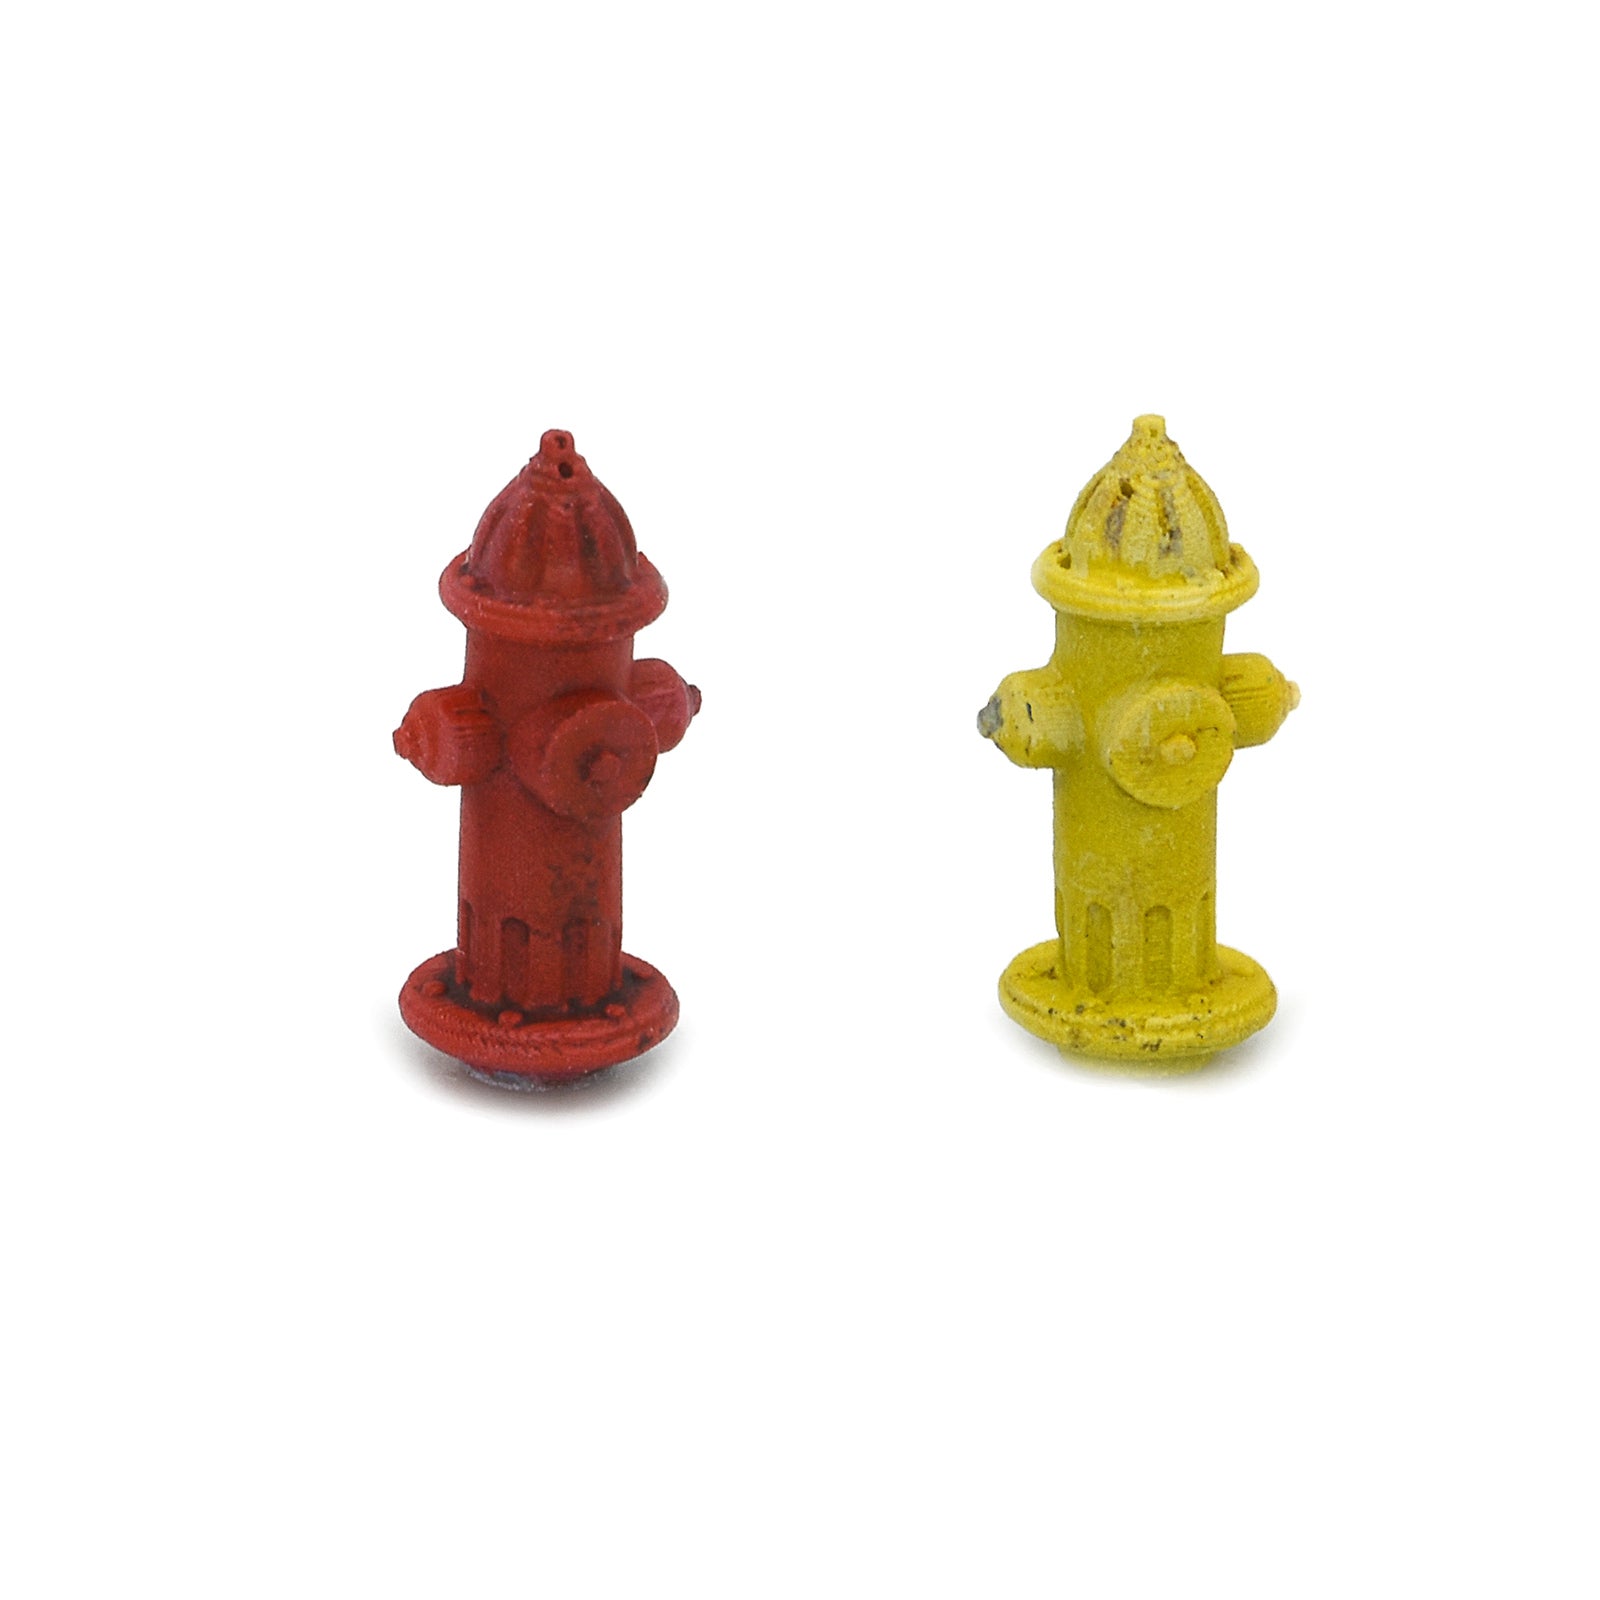 Classic Fire Hydrant, HO Scale, by Scientific, Pack of 10